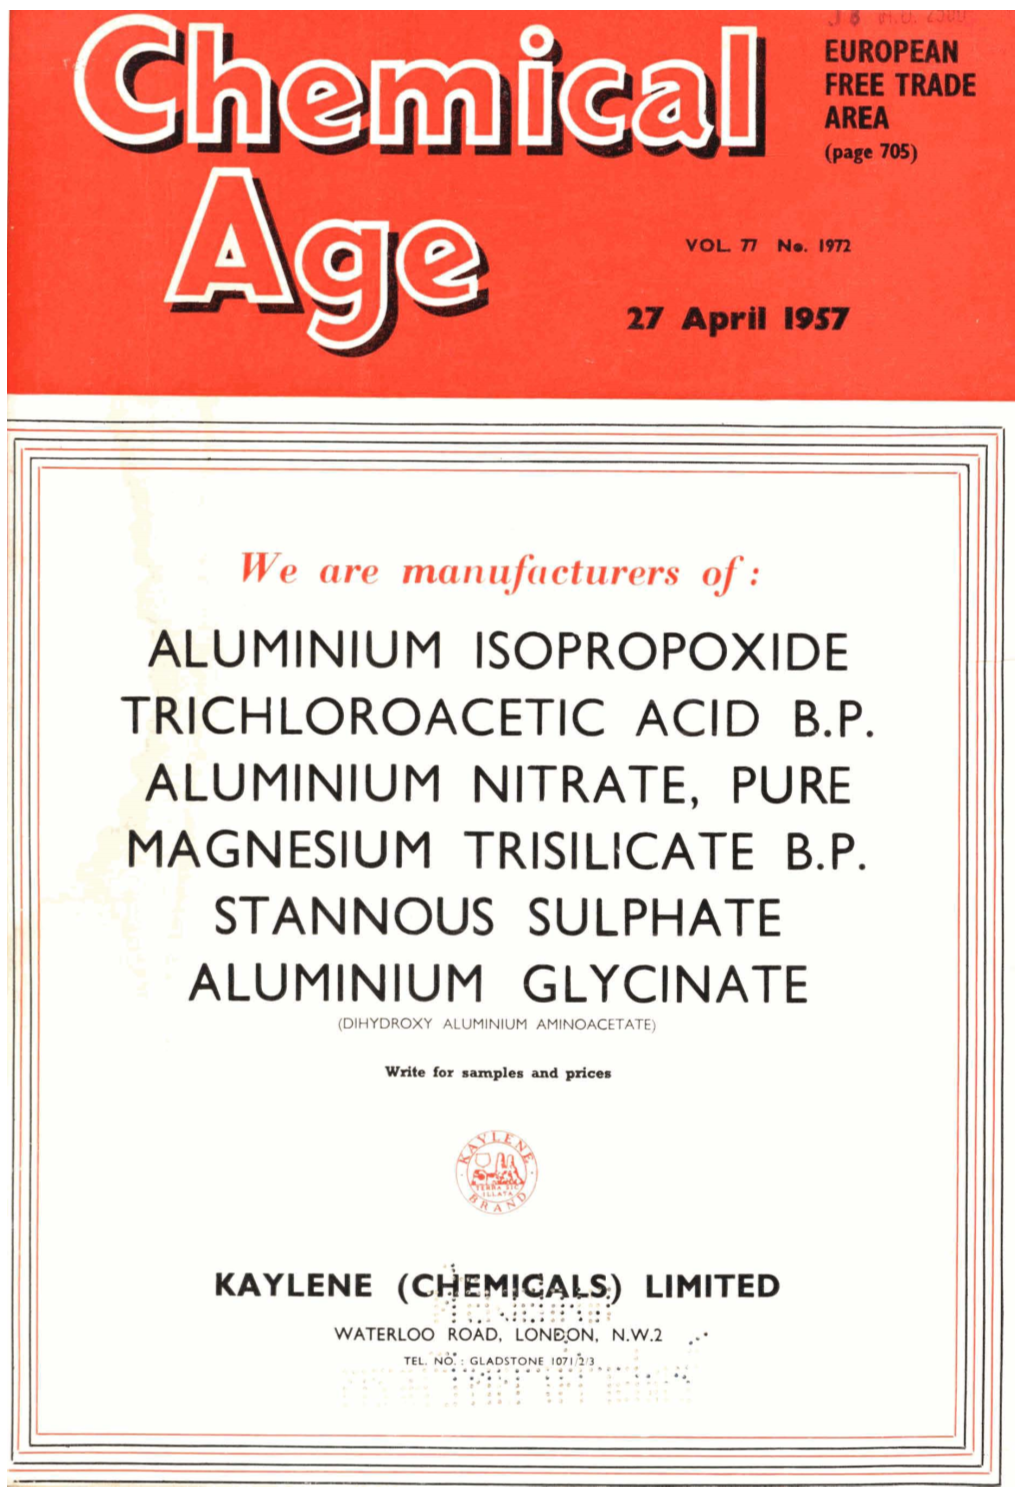 The Chemical Age 1957 Vol.77 No.1972